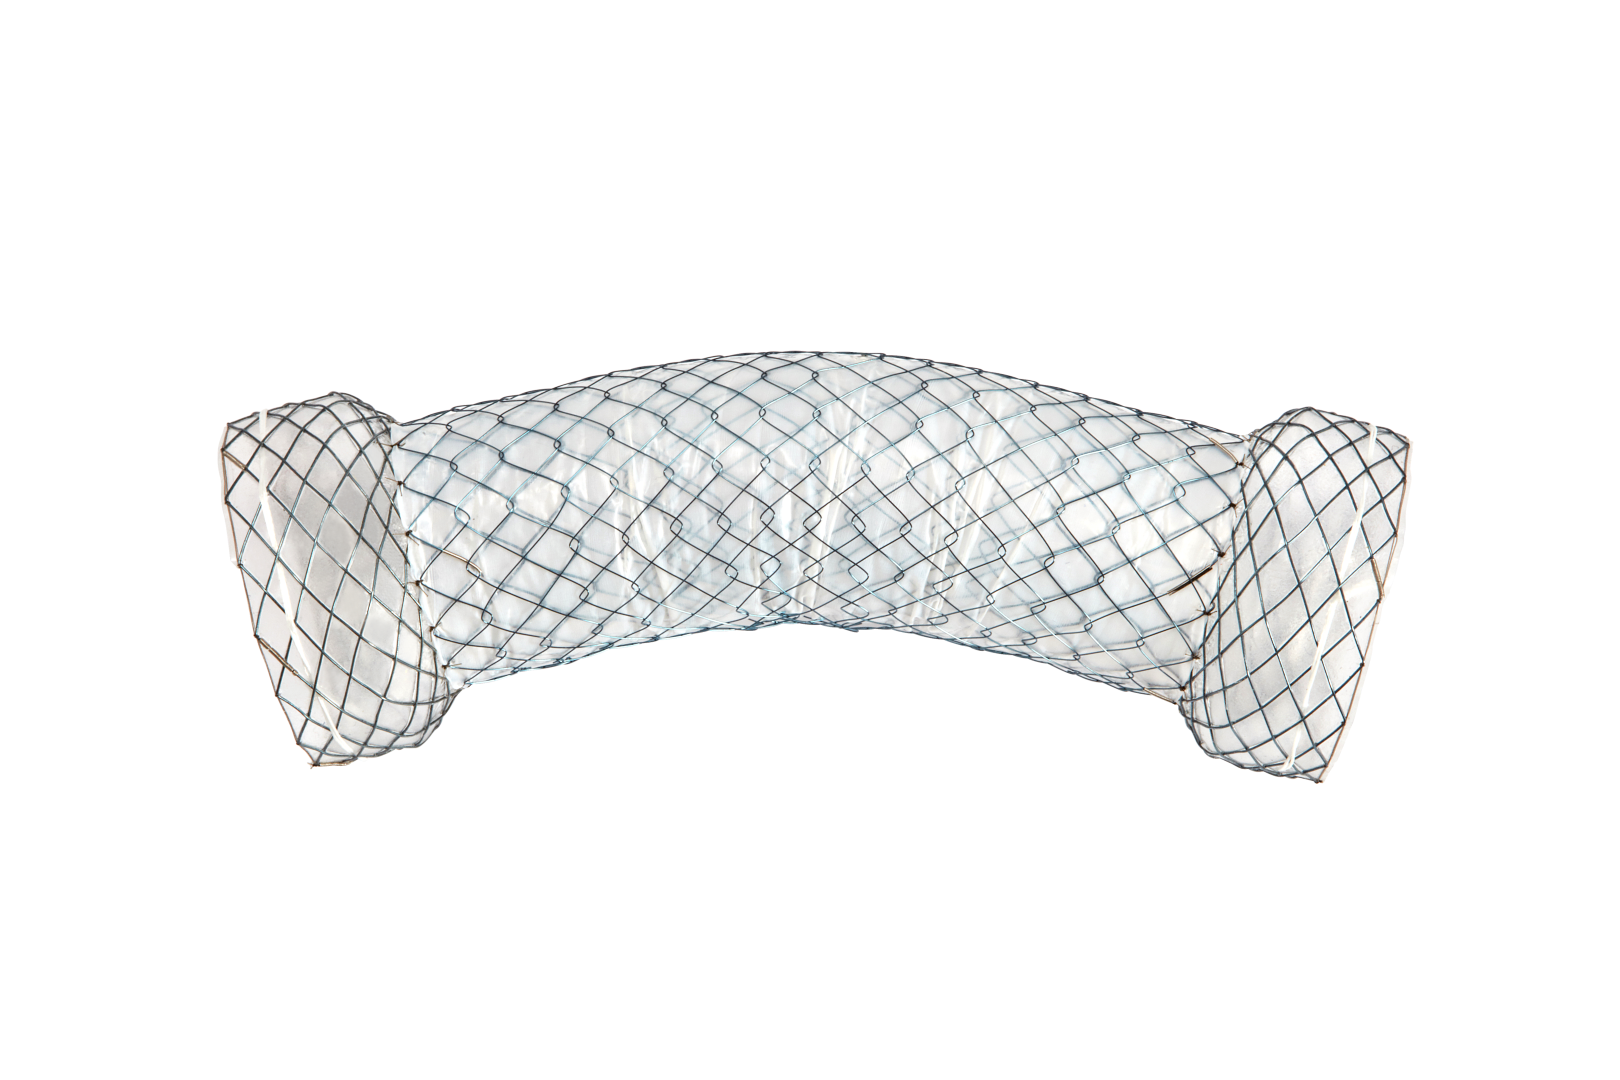 Dual Esophageal Stent